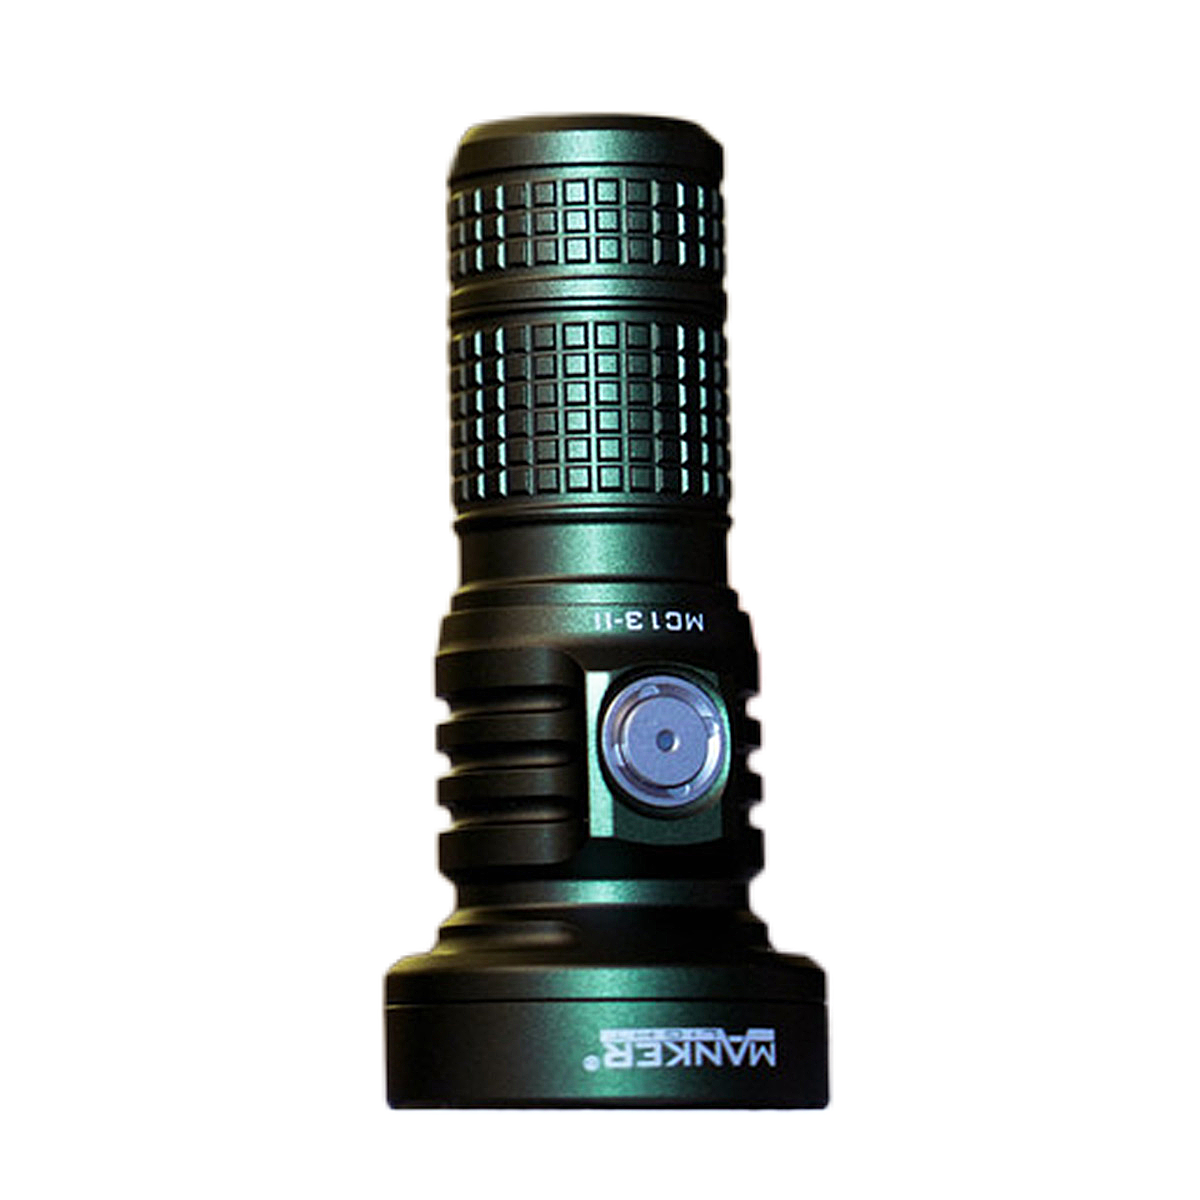 Mankerlight MC13 II SBT90 GEN2 LED Edc Flashlight Dual Use 18650 and 18350 Battery PVD Army Green